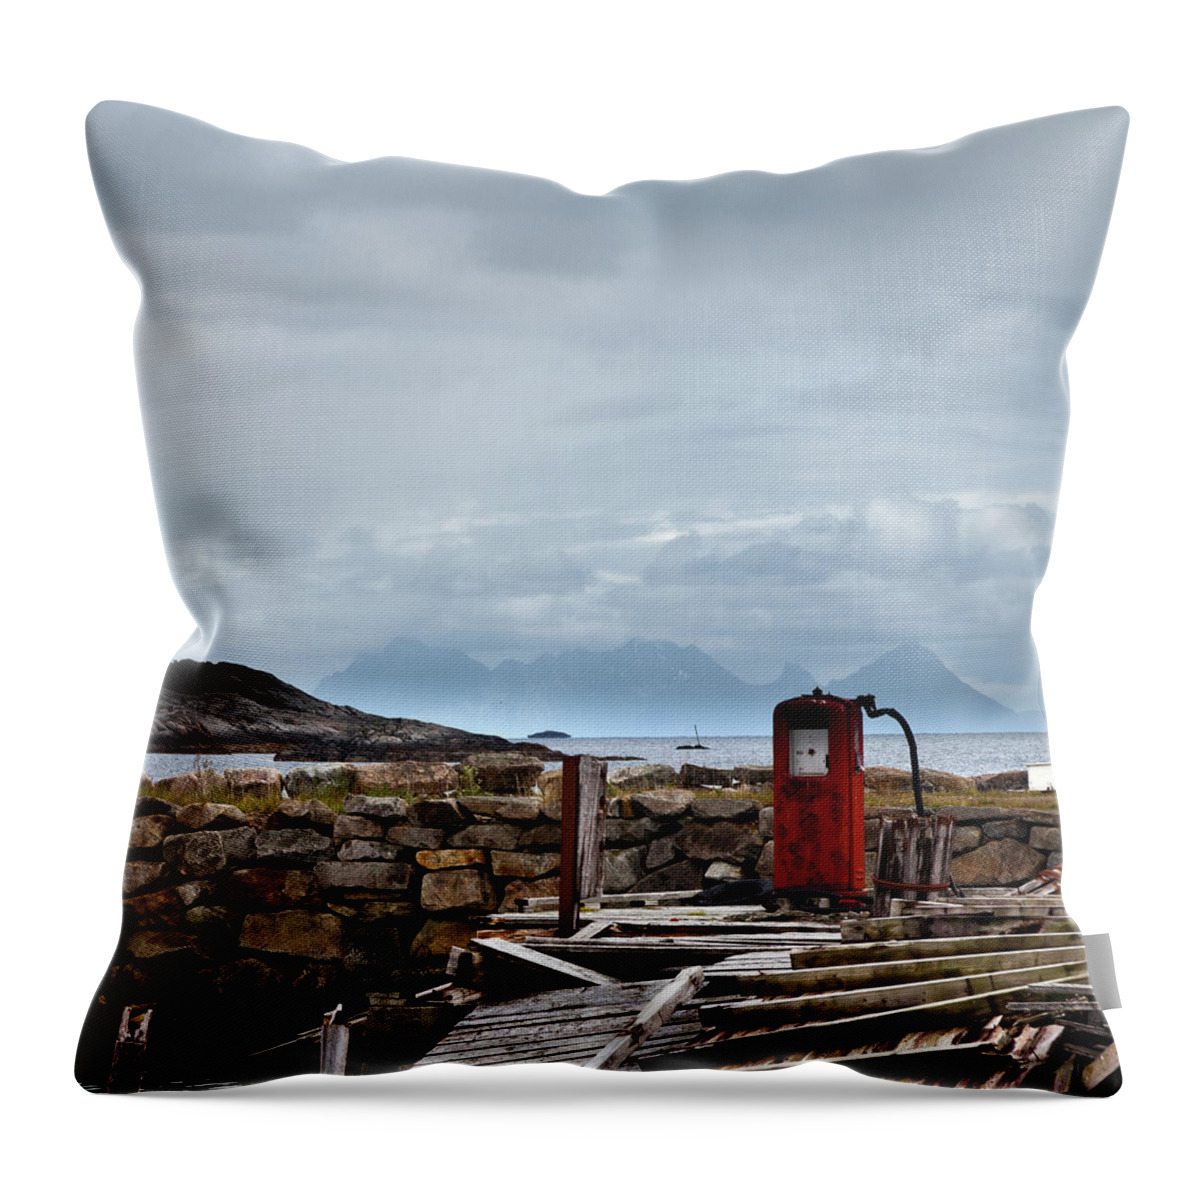 Damaged Throw Pillow featuring the photograph No Gas by Svein Nordrum